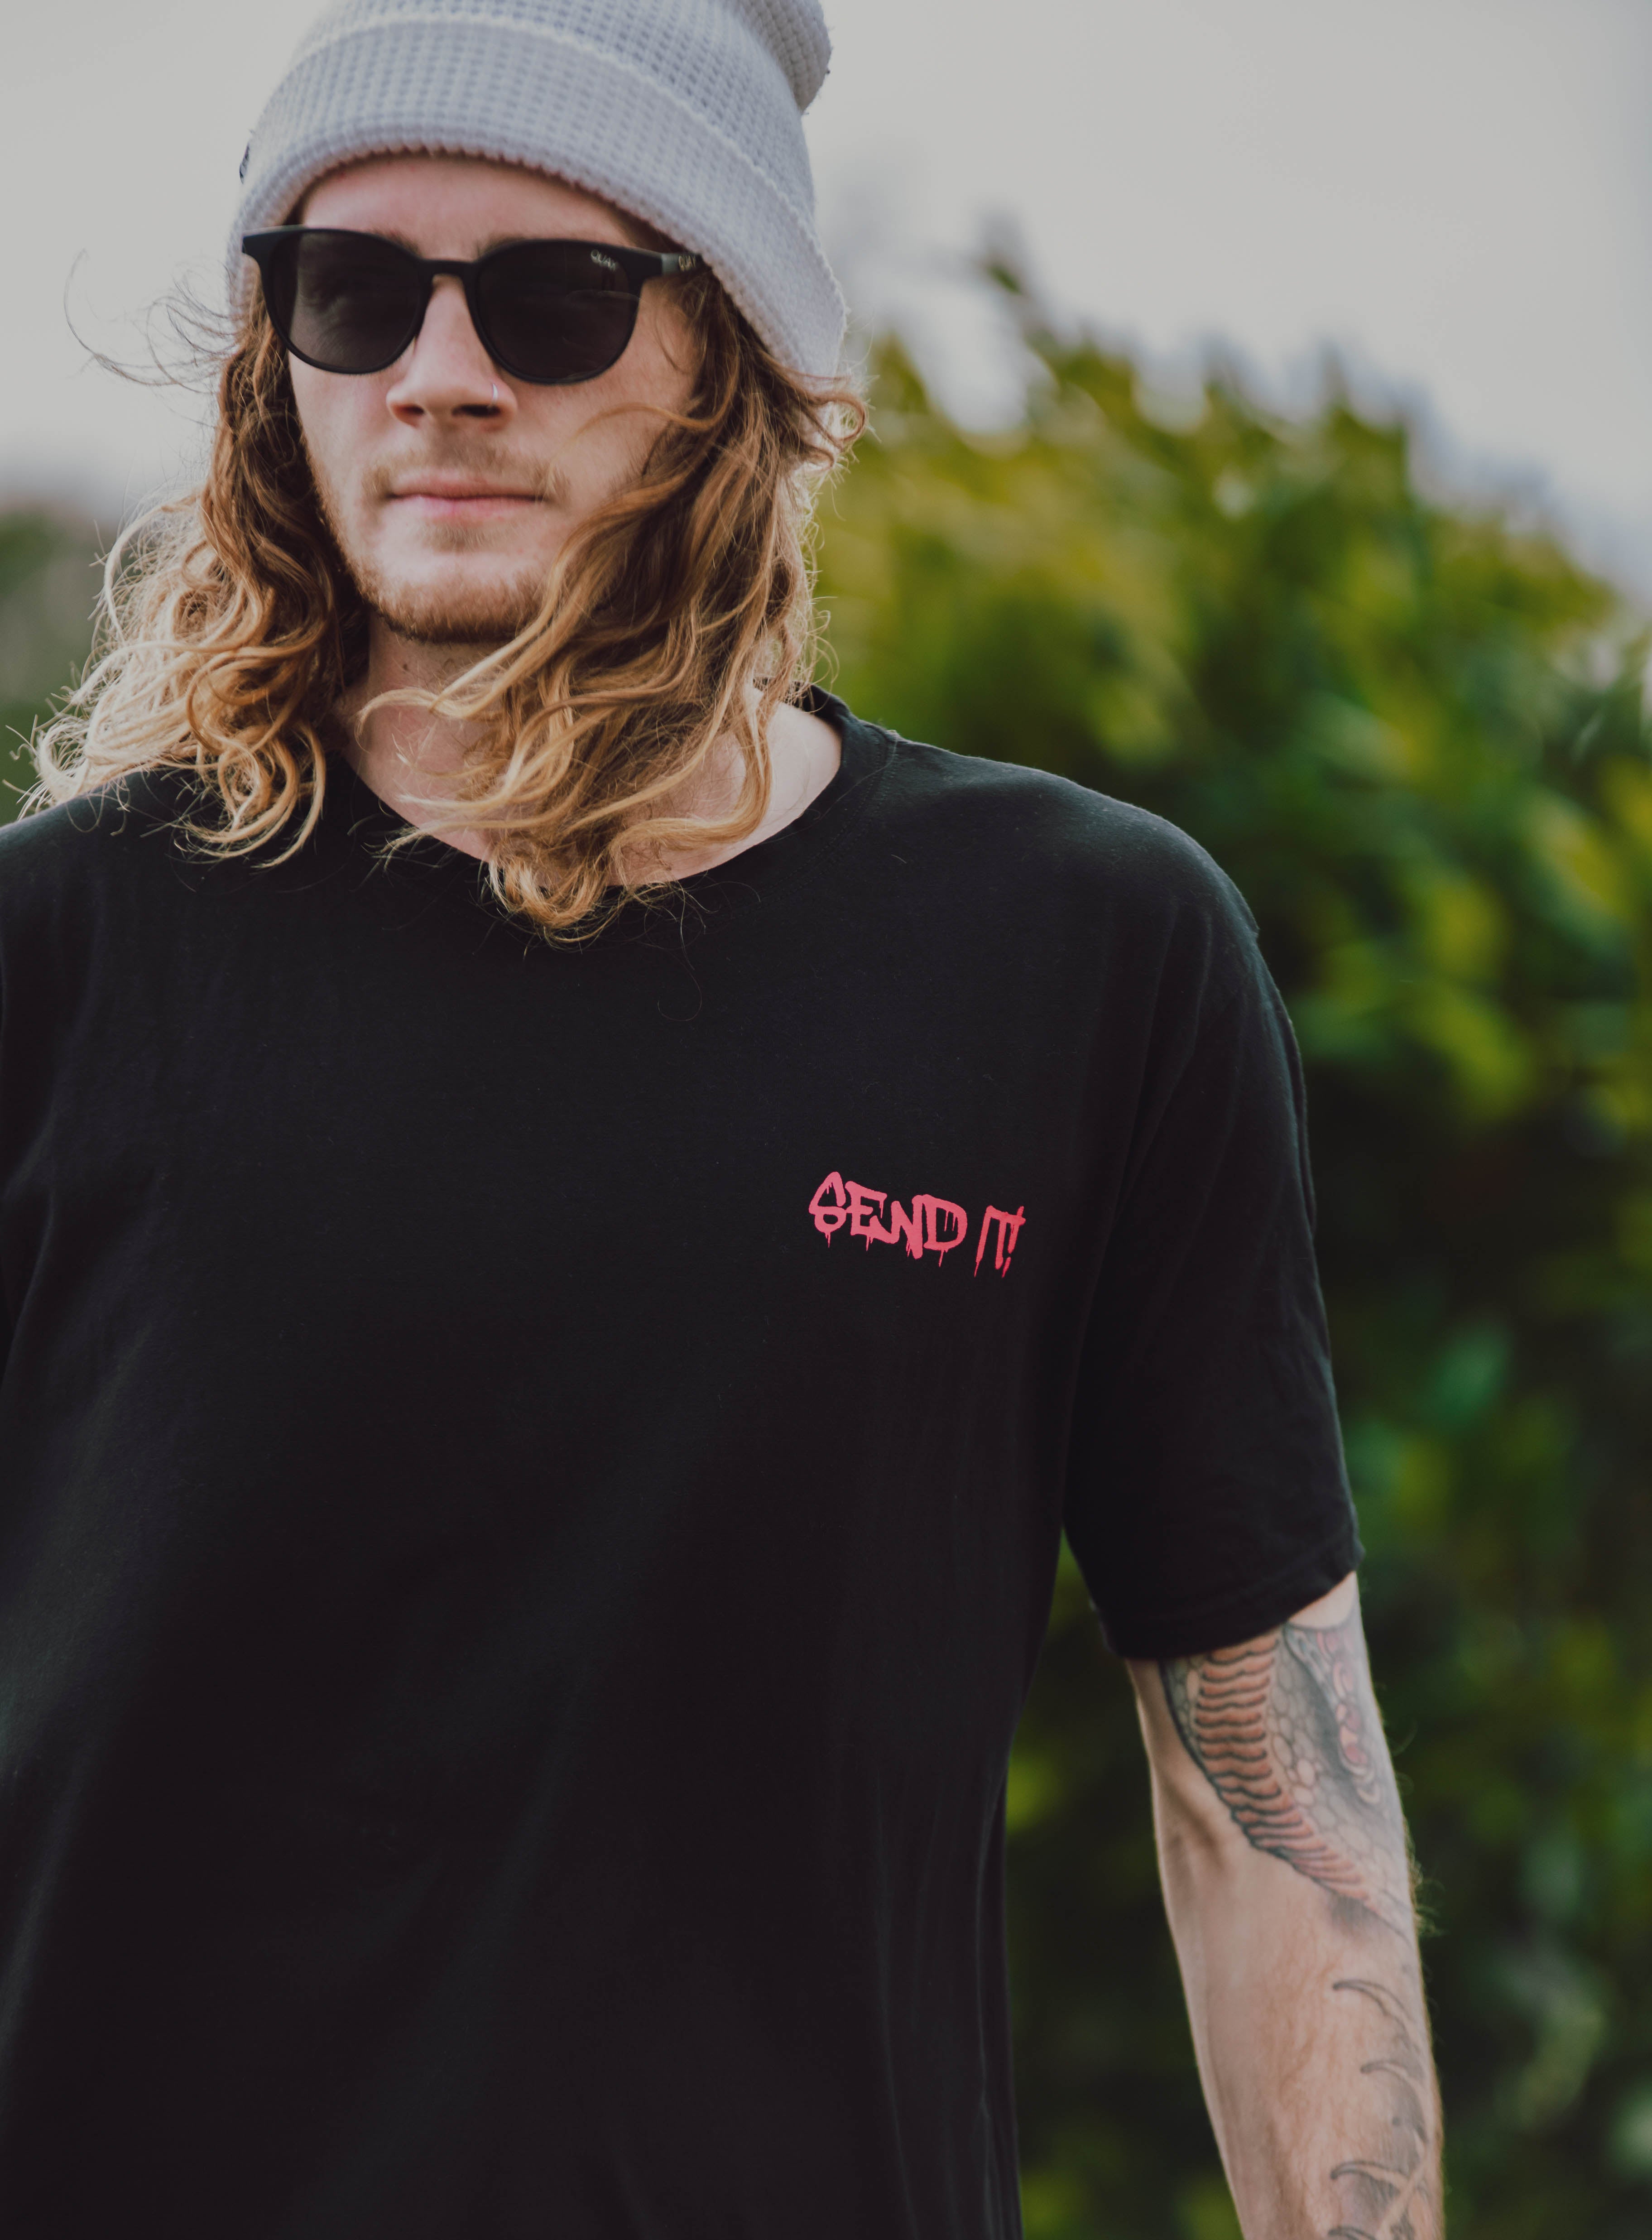 SEND IT TEE PINK (ADULT + YOUTH)